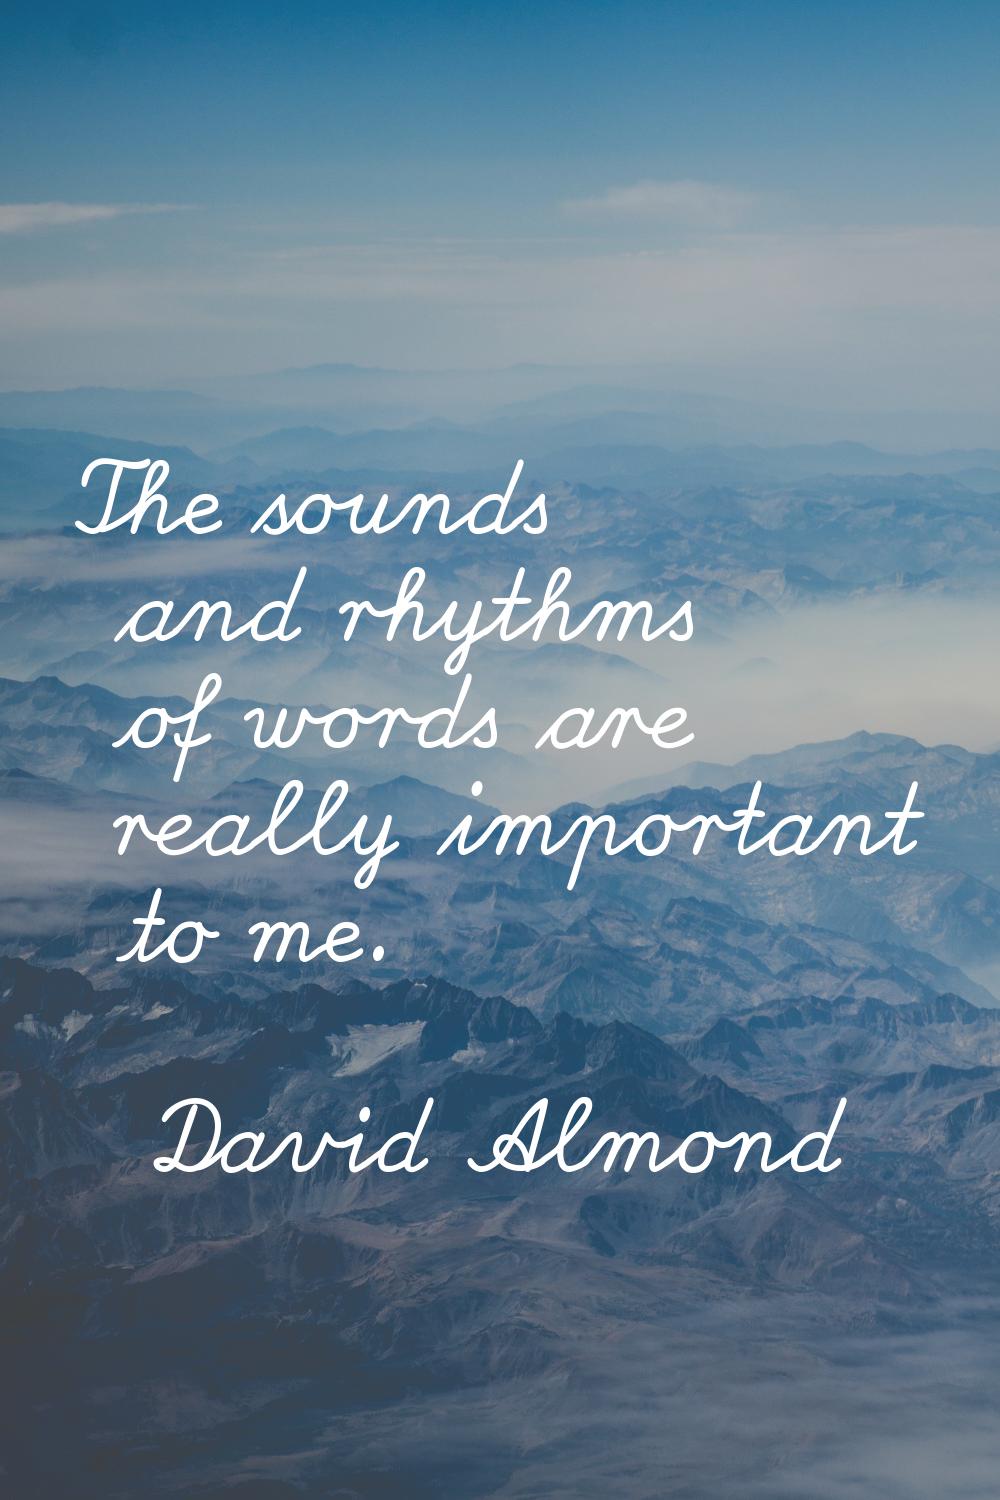 The sounds and rhythms of words are really important to me.